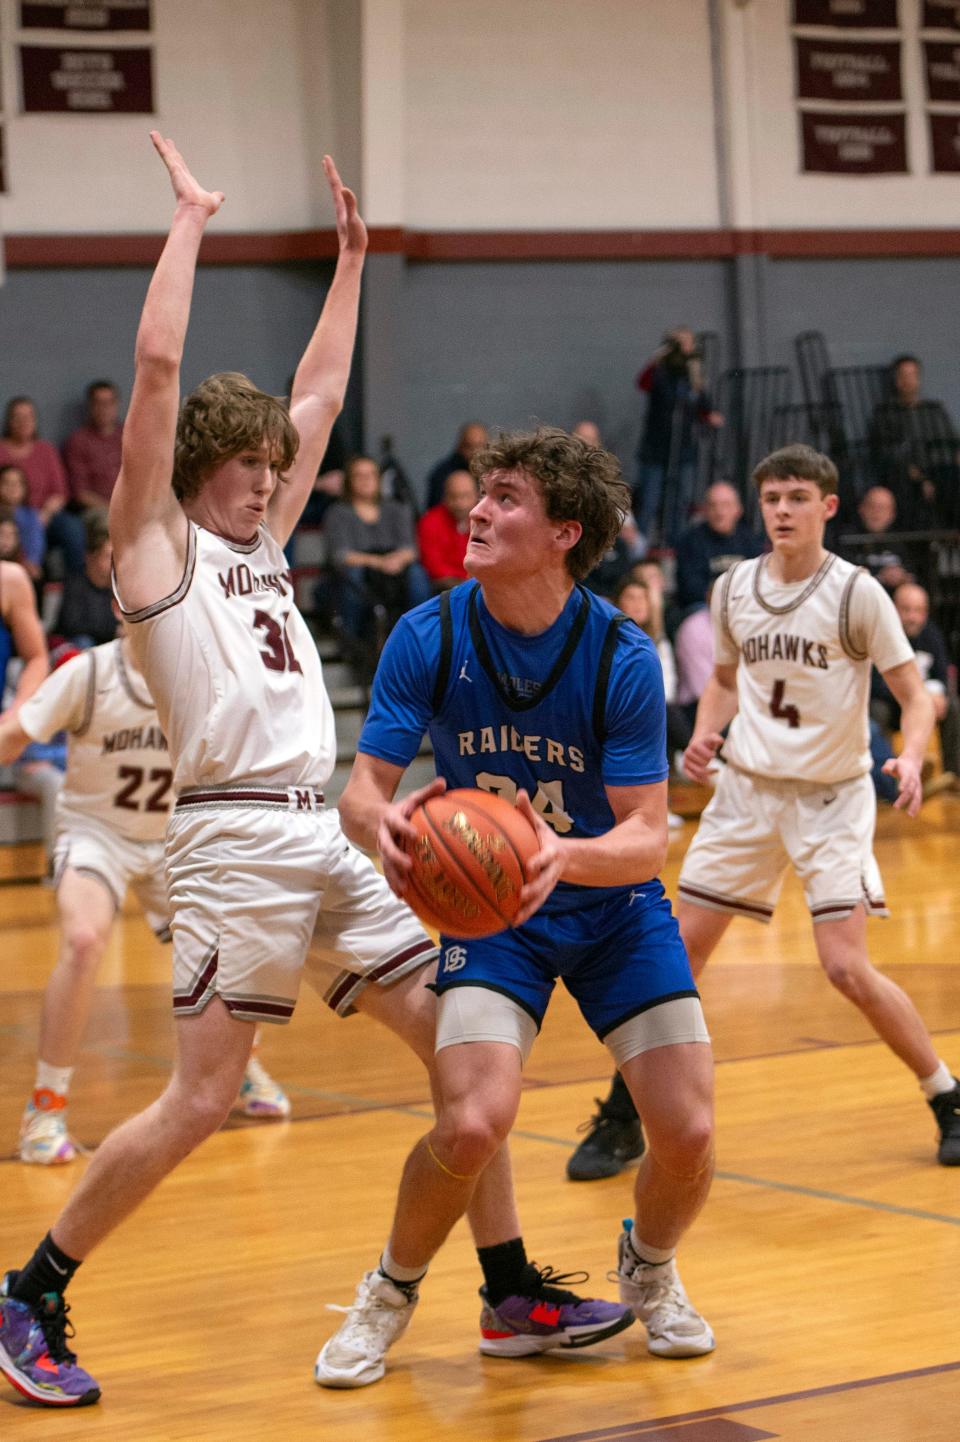 Dover-Sherborn junior captain Brian Olson eyes the basket, as Millis High junior captain Adam Hart pressures, during the game in Millis, Jan. 31, 2023. The Raiders defeated the Mohawks, 75-60.